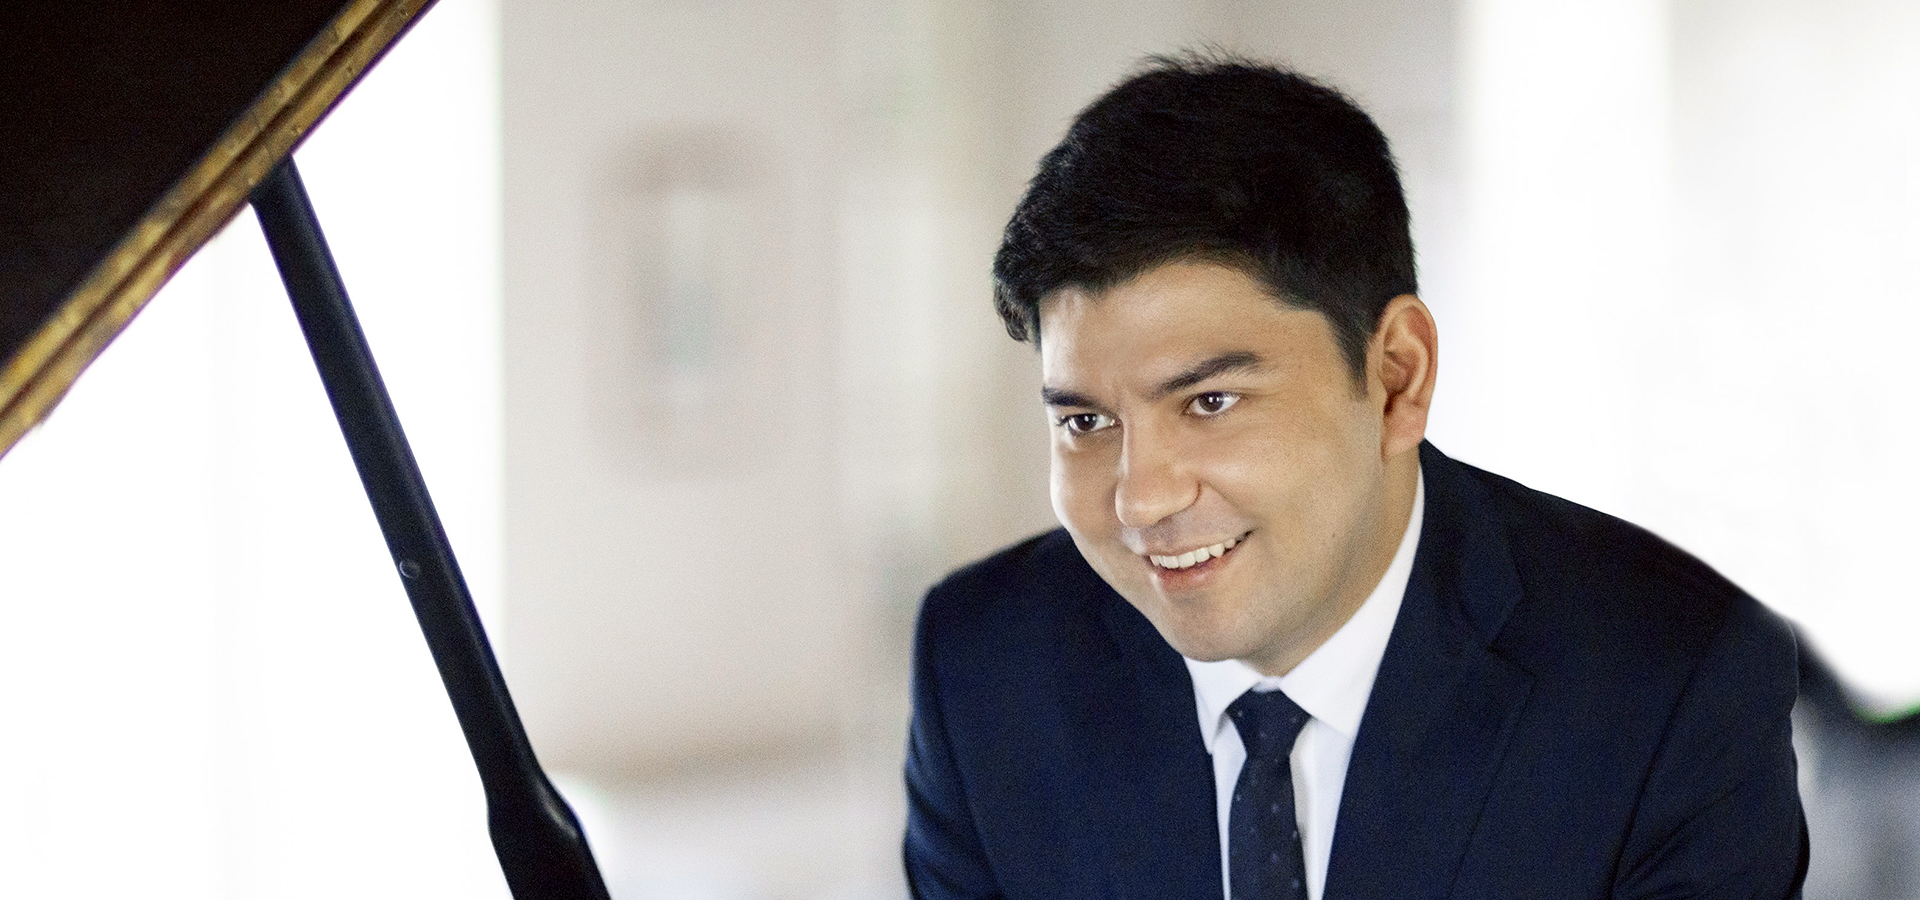 Behzod Abduraimov wears a navy suit and sits at an open grand piano, smiling.